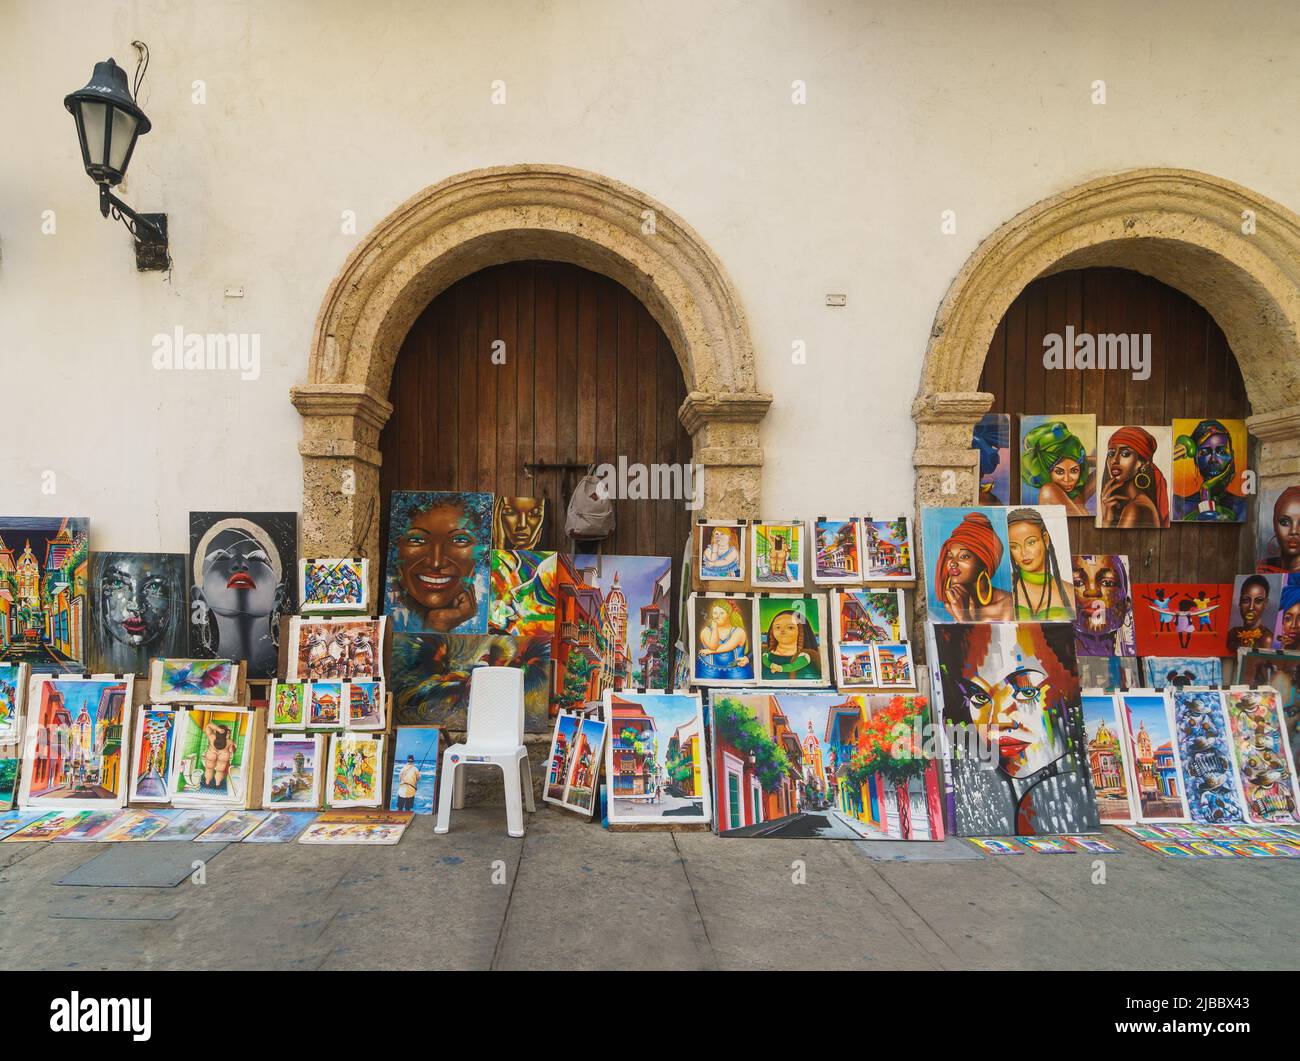 Cartagena, Colombia - May 07 2022: Paintings representing Caribbean woman and city views are displayed in the street of the Cartagenia colonial old to Stock Photo